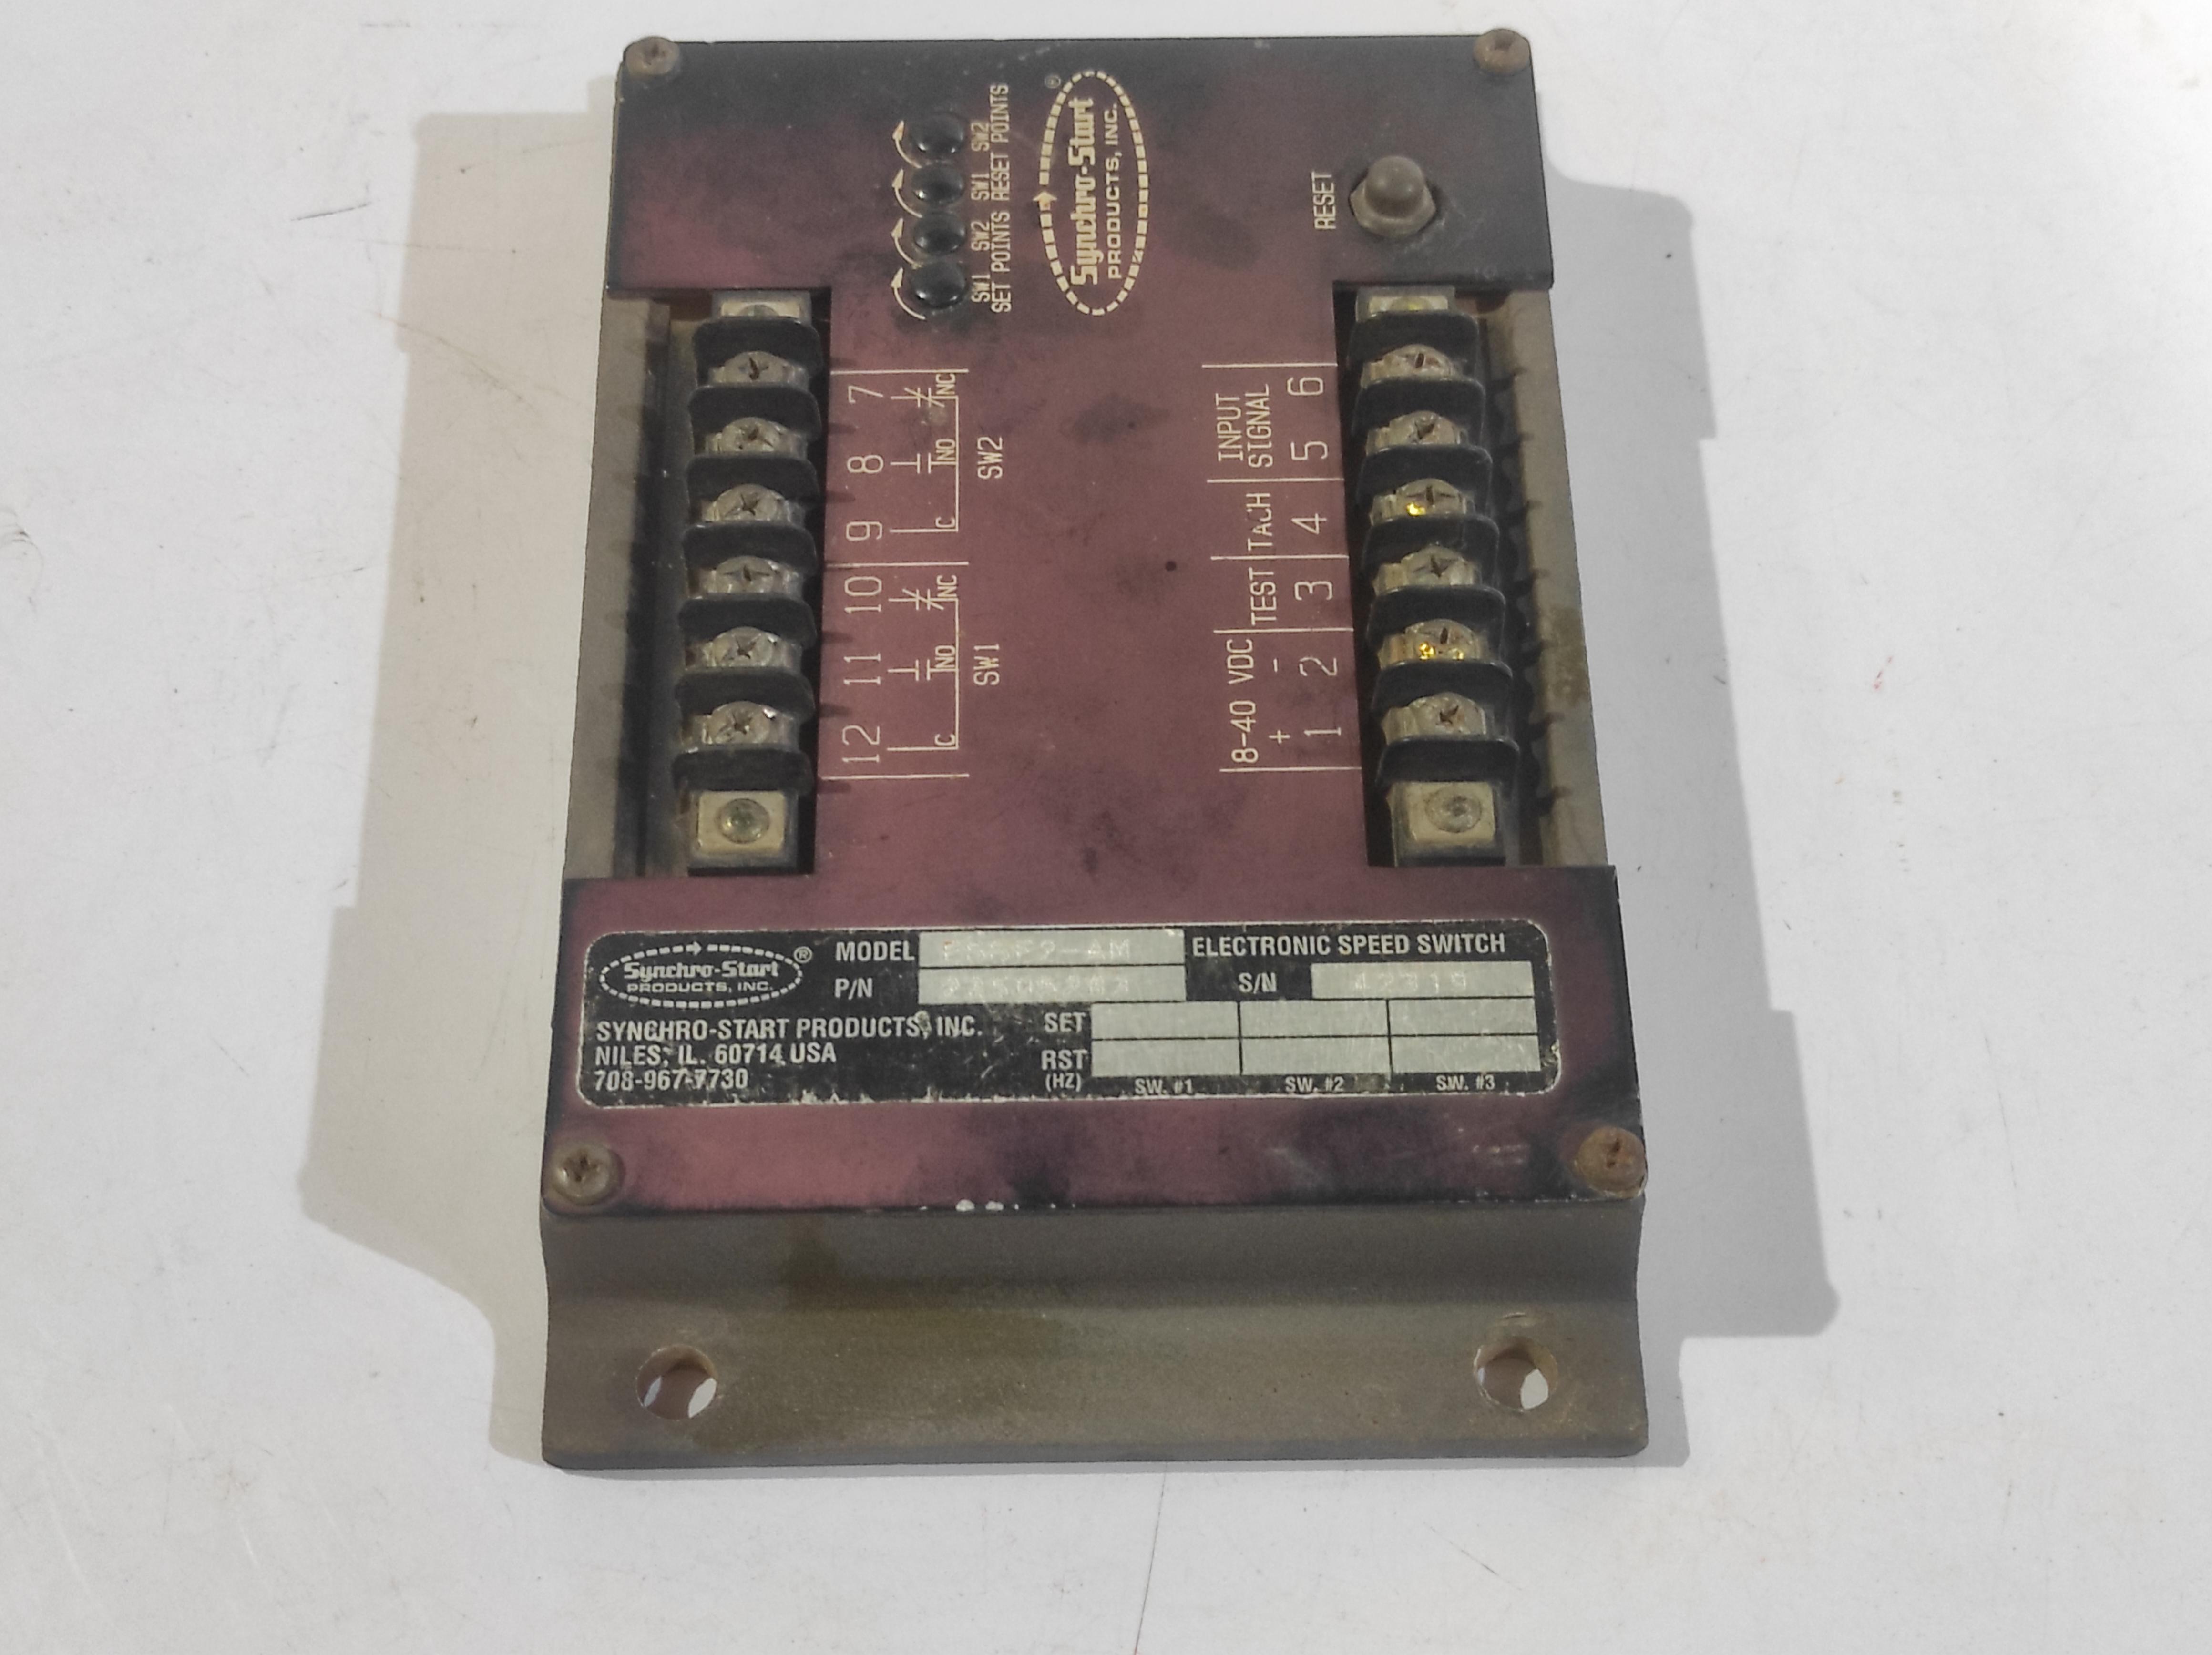 Synchro Start ESSE2-AM 23505283 Electronic Speed Switch